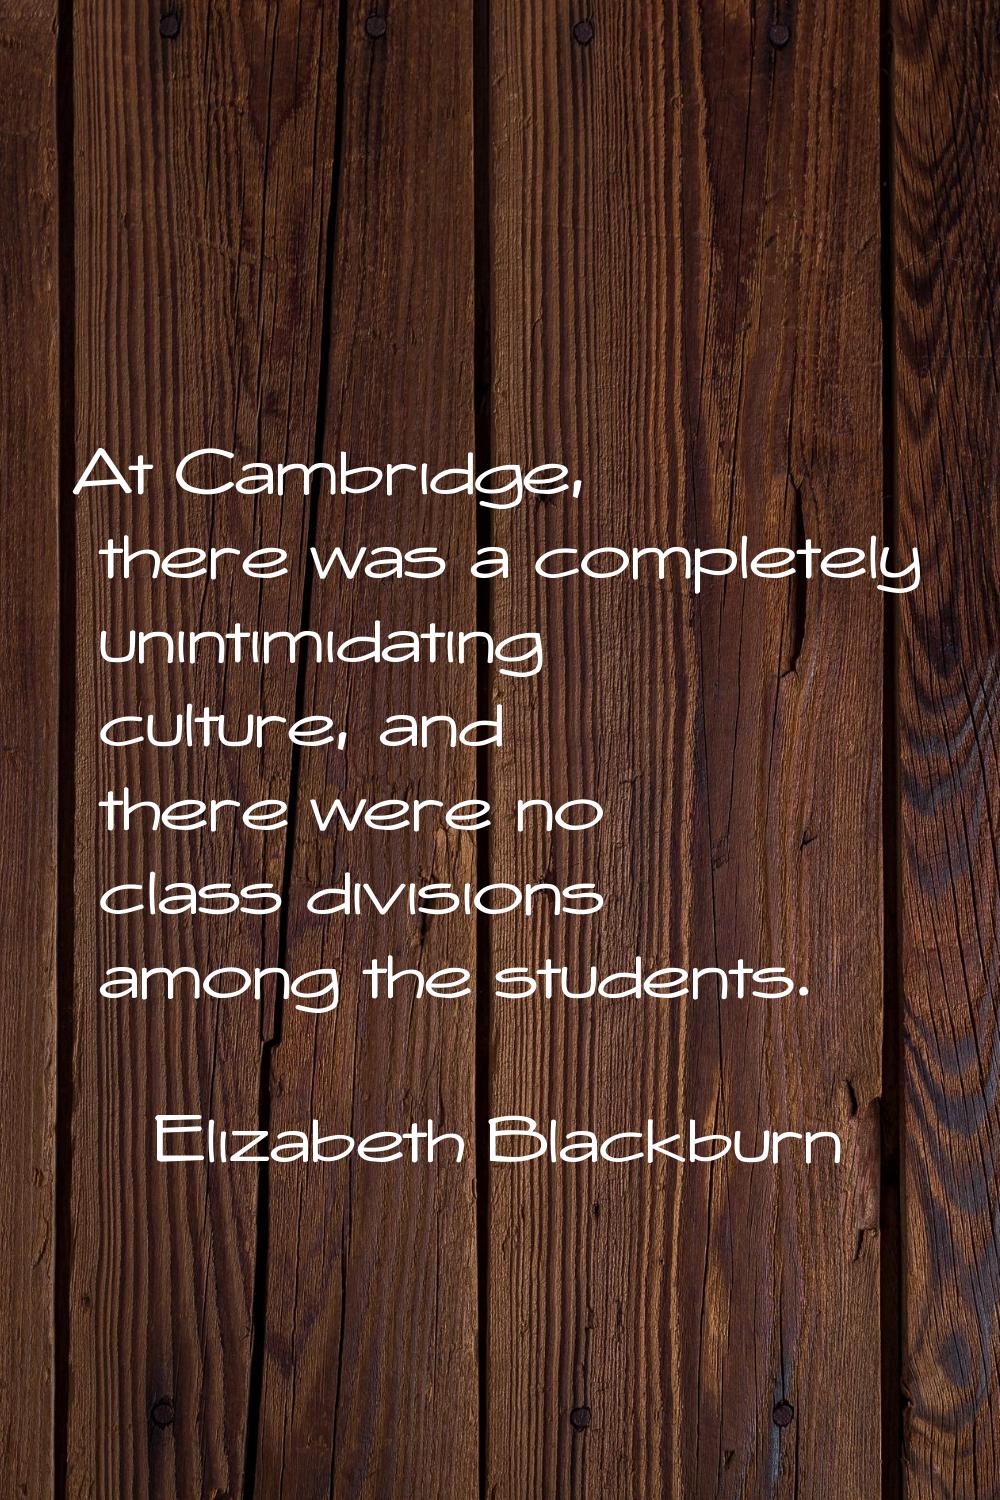 At Cambridge, there was a completely unintimidating culture, and there were no class divisions amon